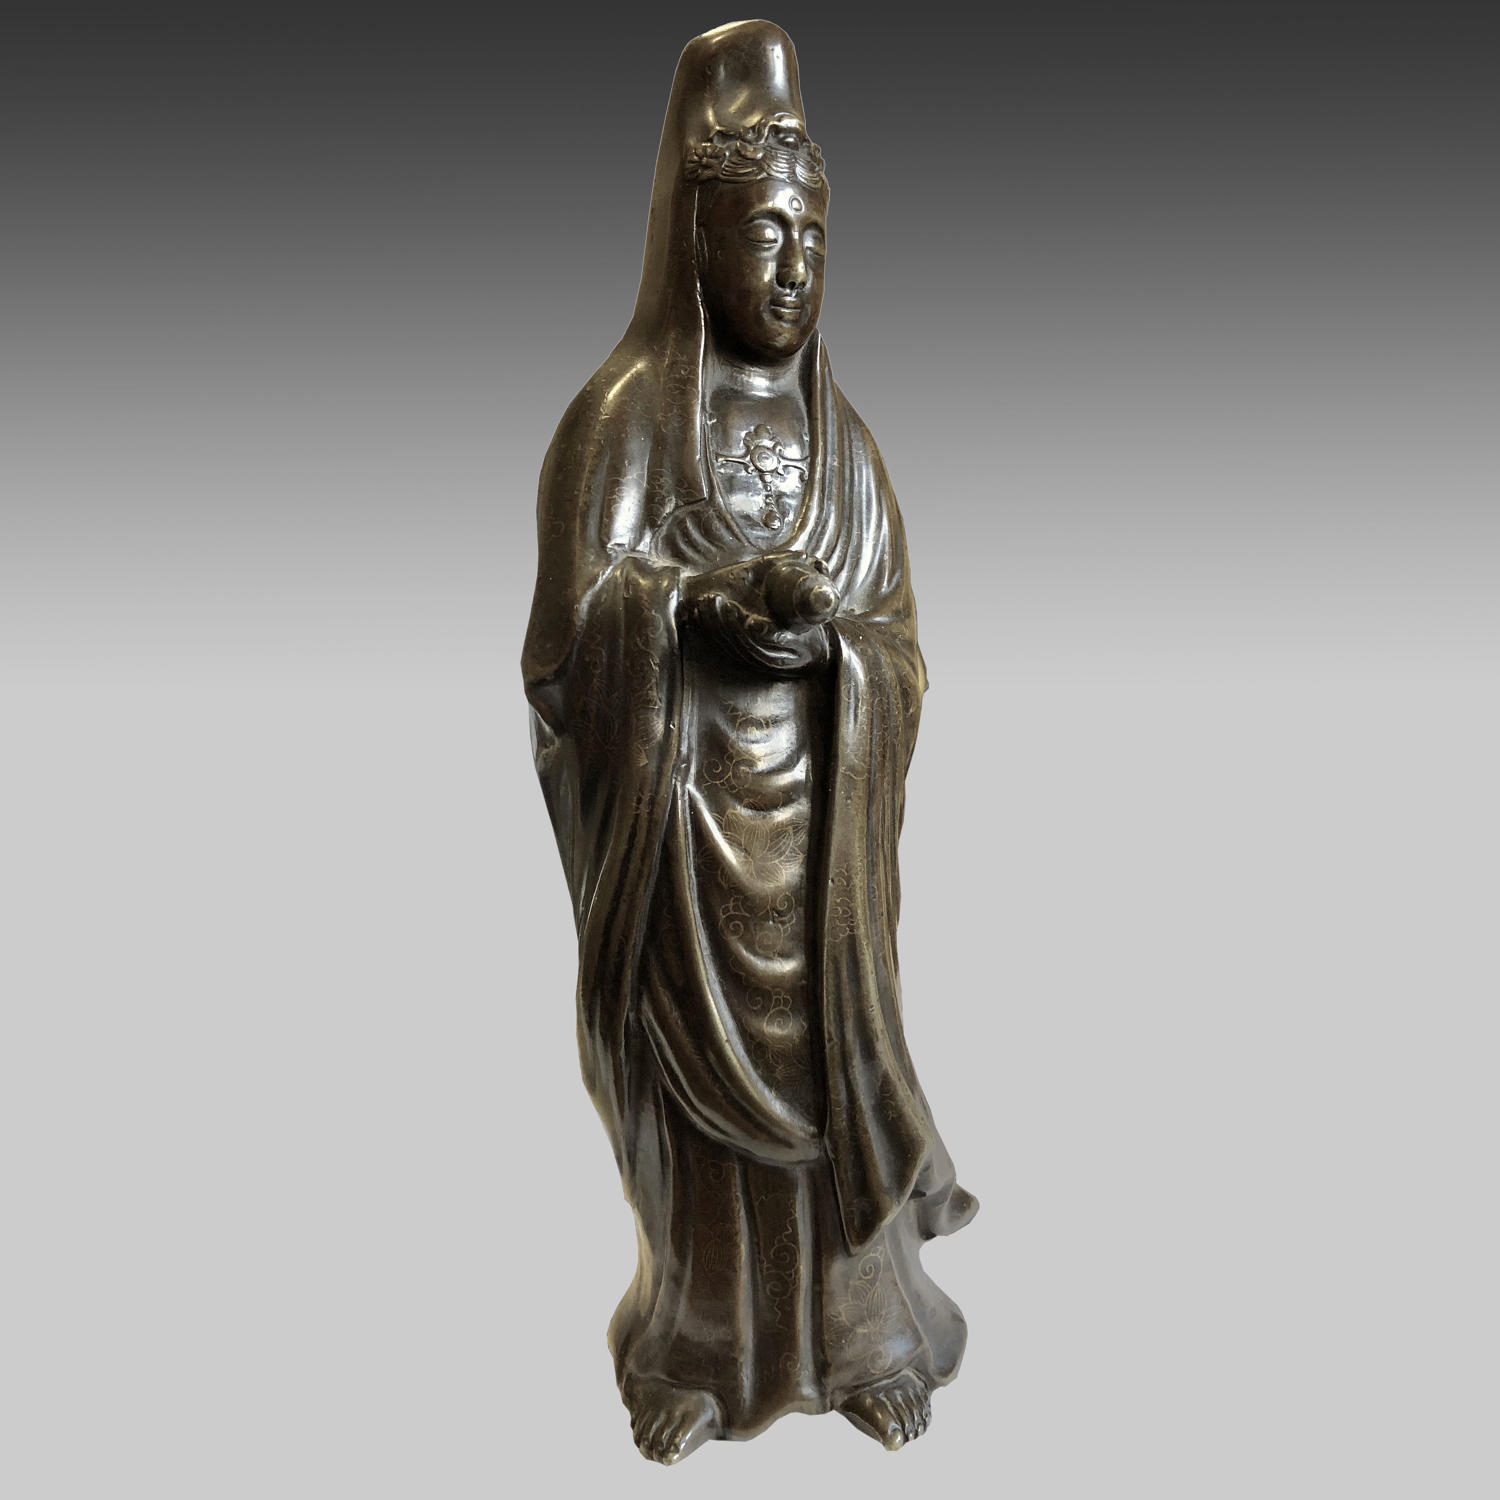 Antique Chinese bronze statue of Guanyin